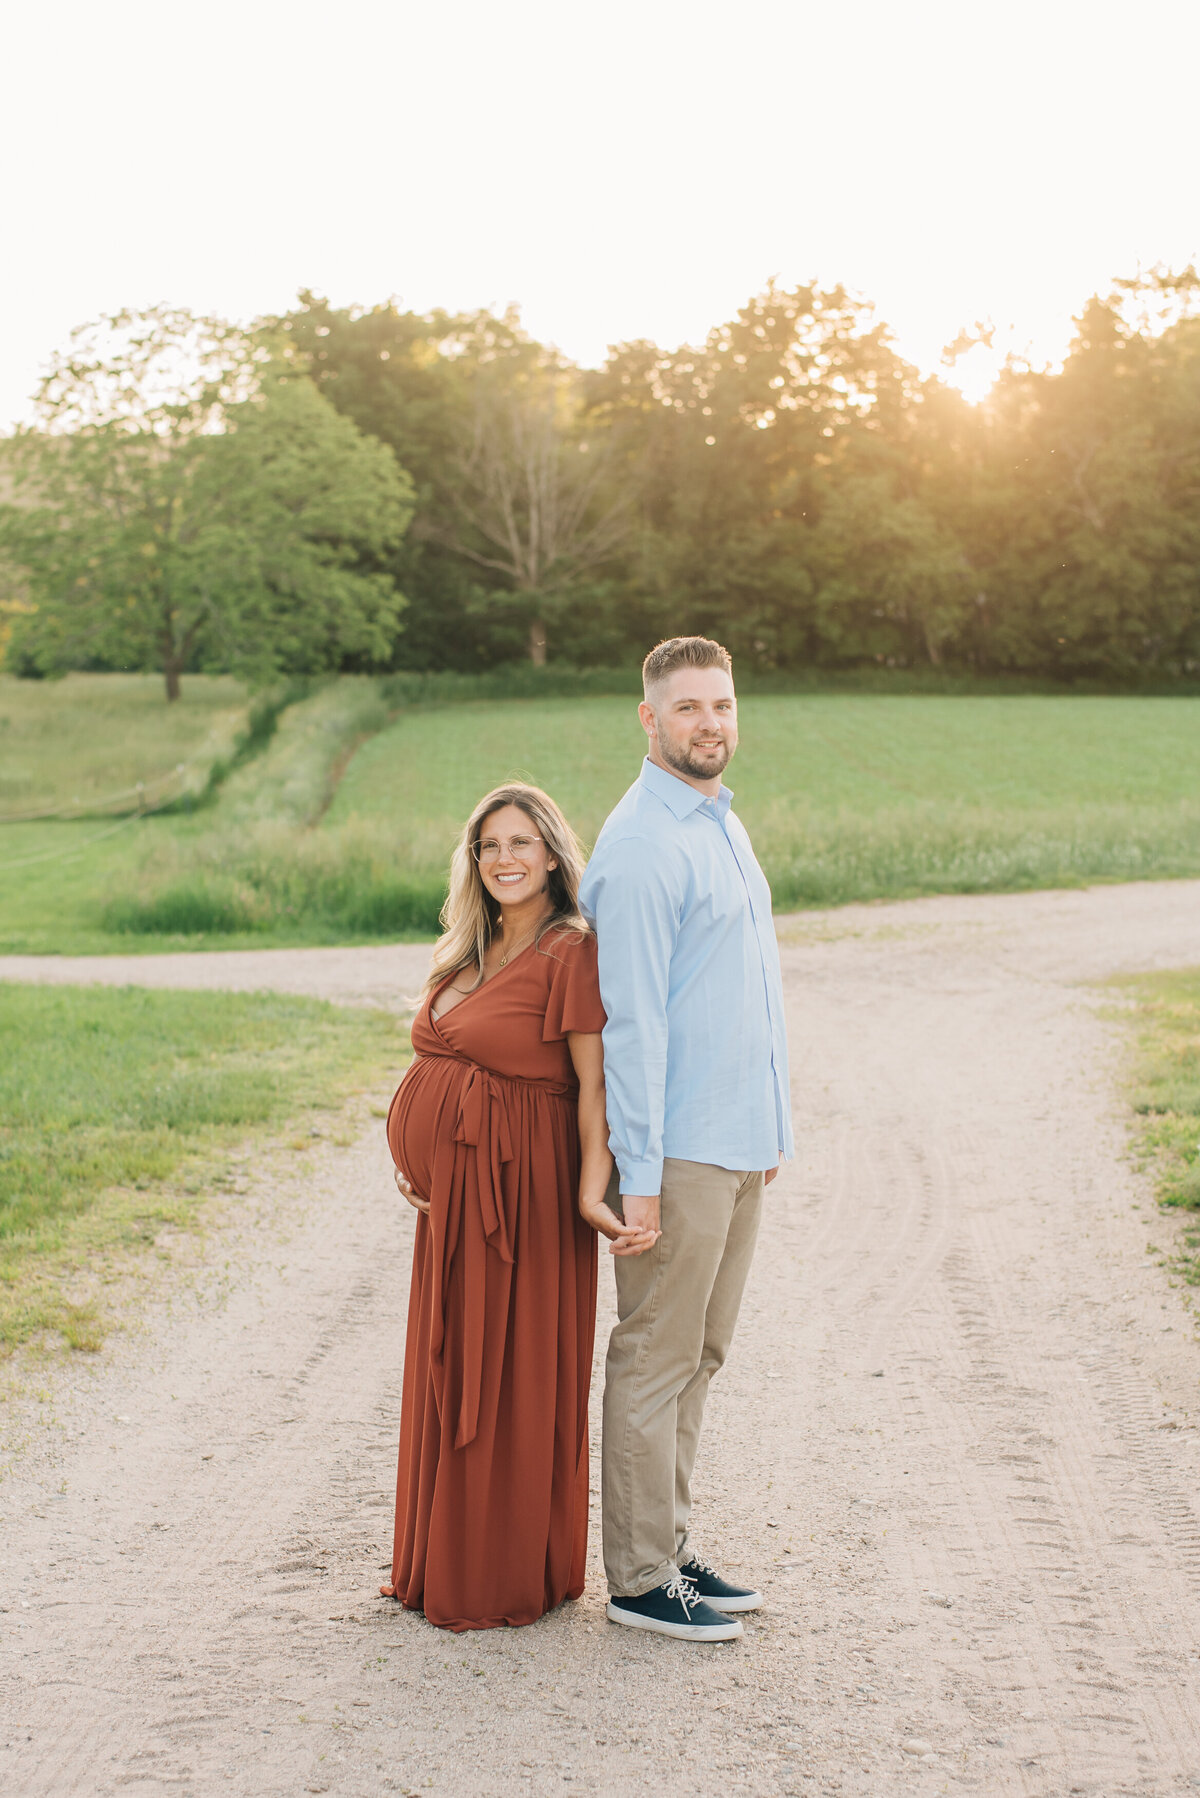 Expecting mother and father, standing back to back on dirt road